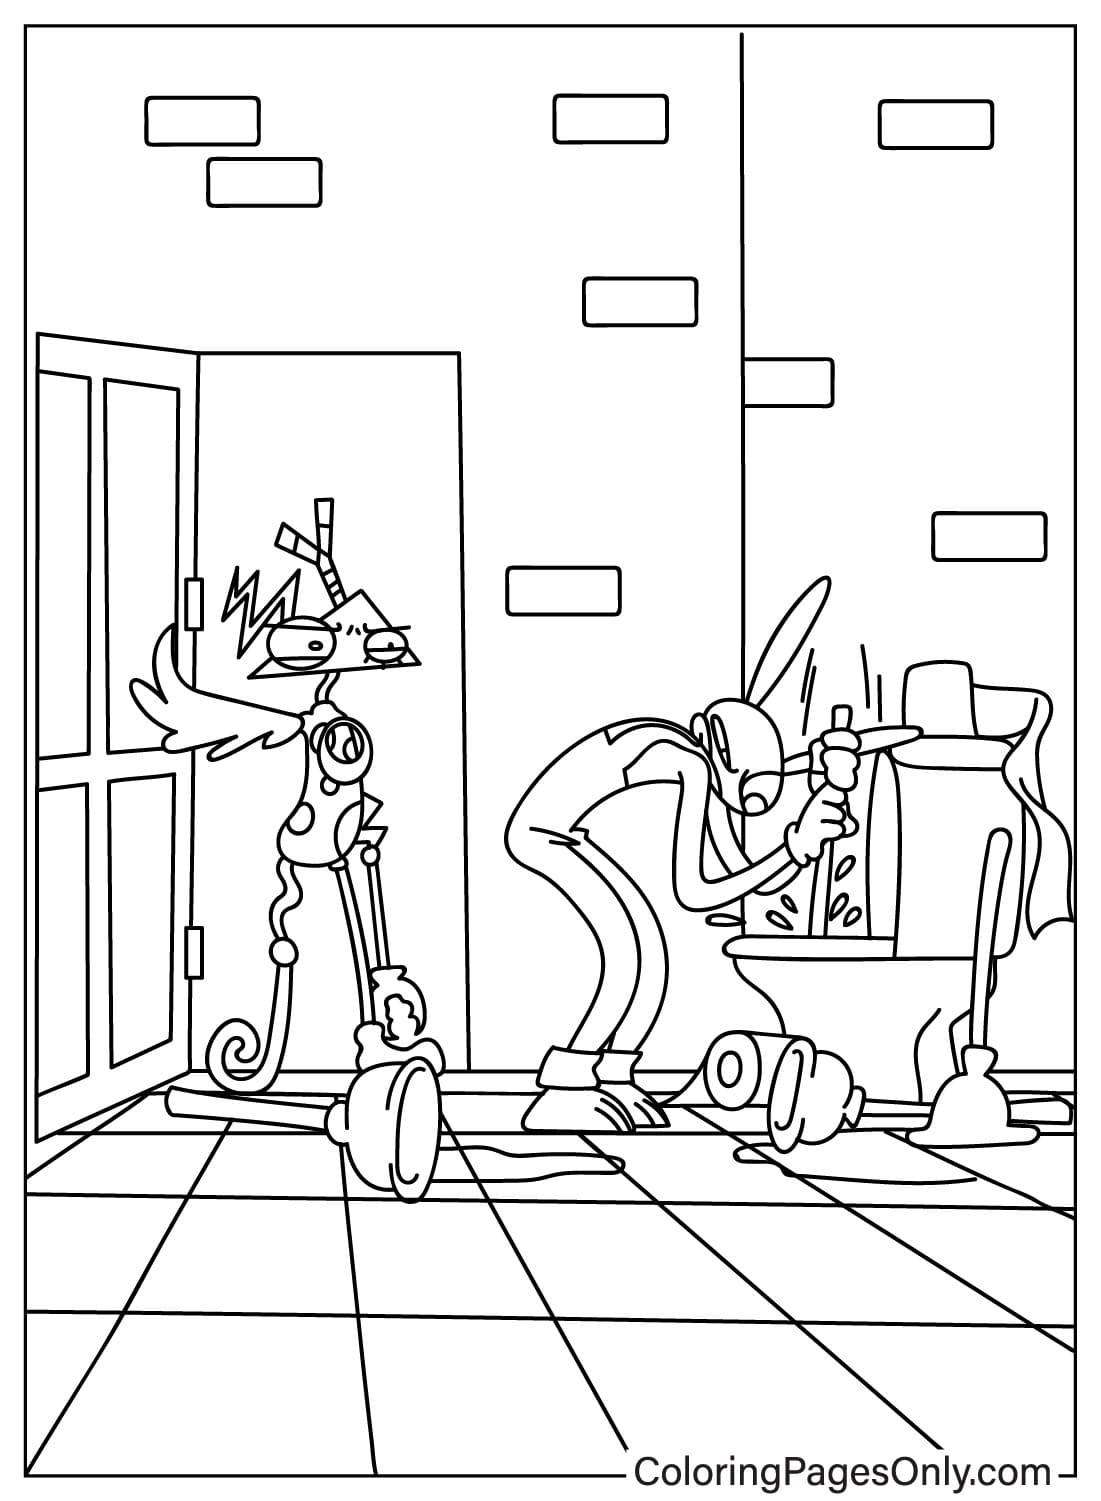 Zooble and Jax Coloring Page from Jax